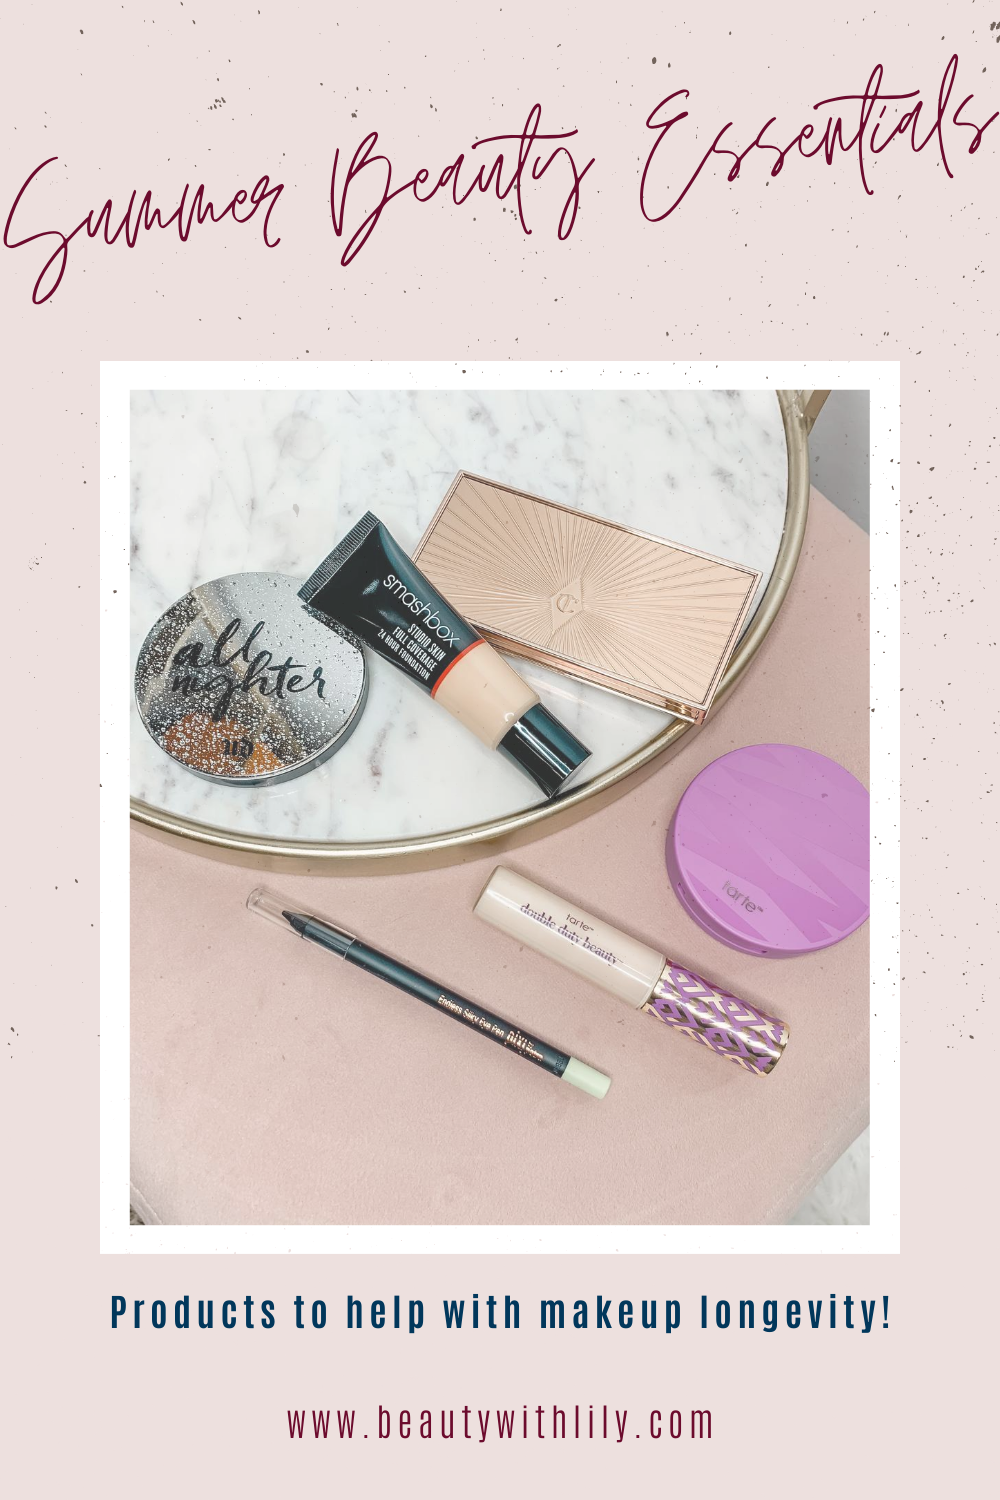 Summer Beauty Essentials // Summer Beauty Must Haves // Products for the Heat // Beauty Products That Last // Makeup for Oily Skin // Beauty Products for Oily Skin // Oily Skin Makeup Looks // Beauty Tips & Tricks | Beauty With Lily #summermusthaves #summerbeauty